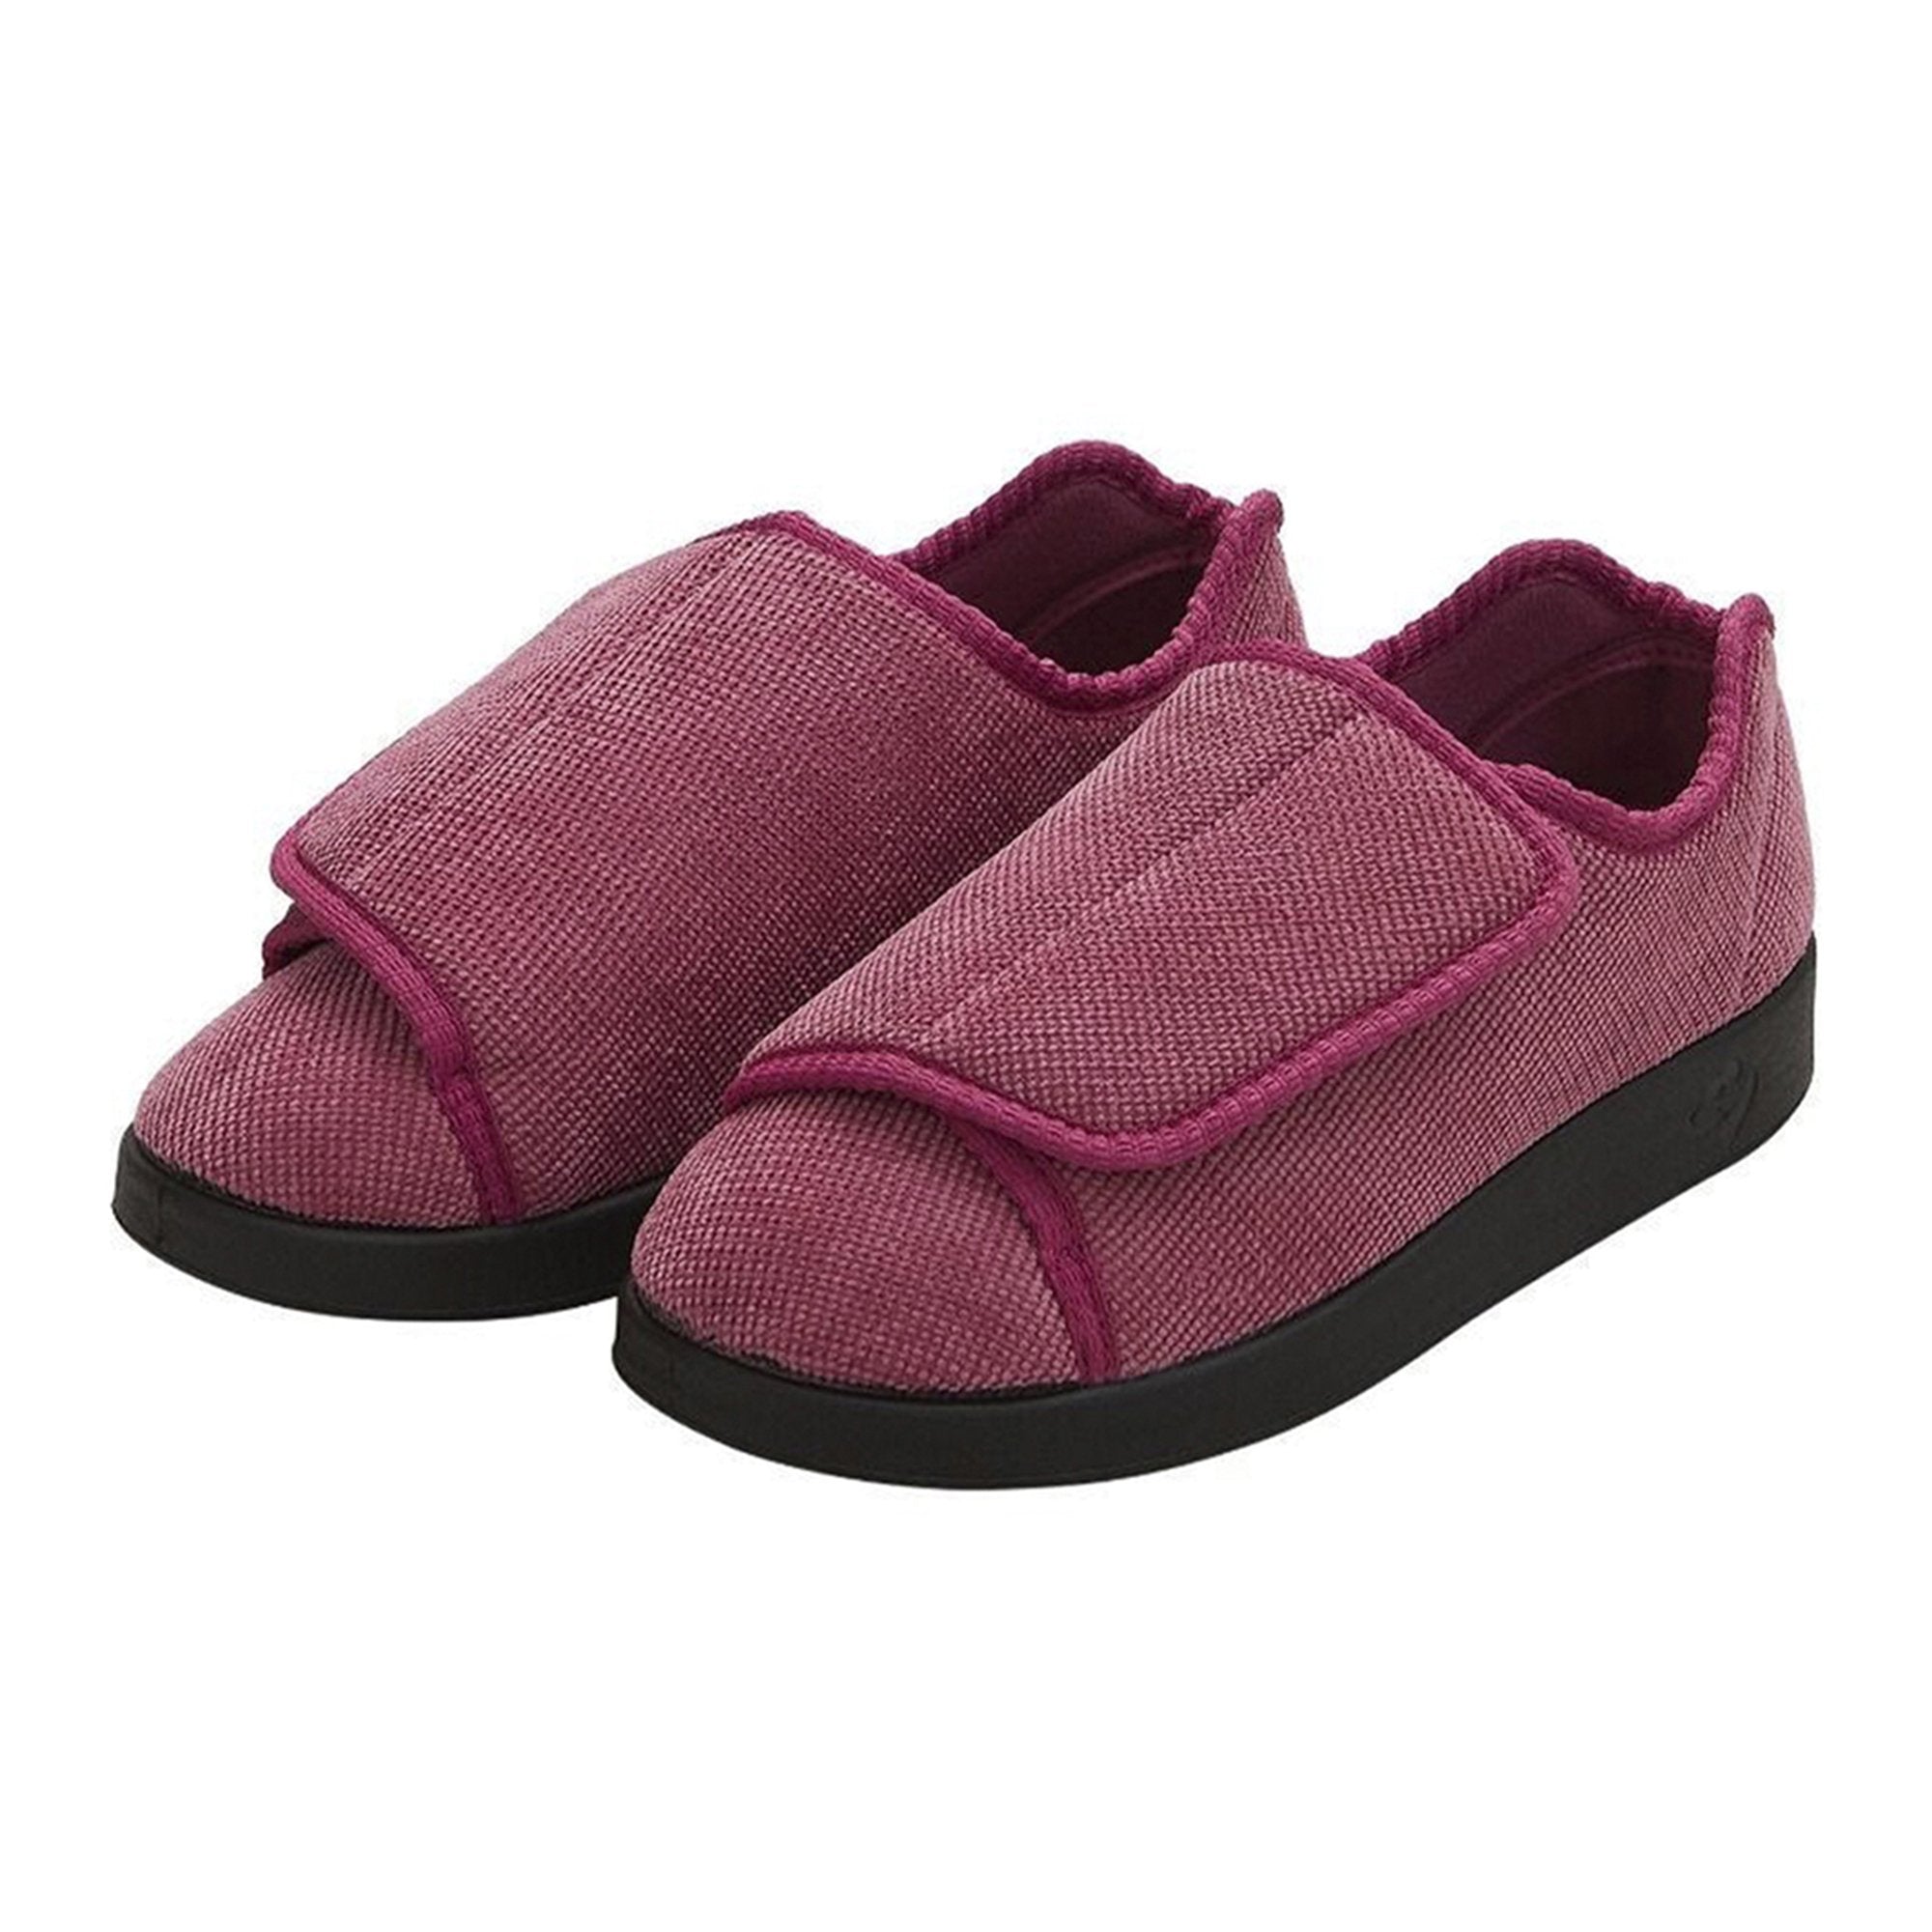 Slippers Silverts® Size 11 / 2X-Wide Dusty Rose Easy Closure